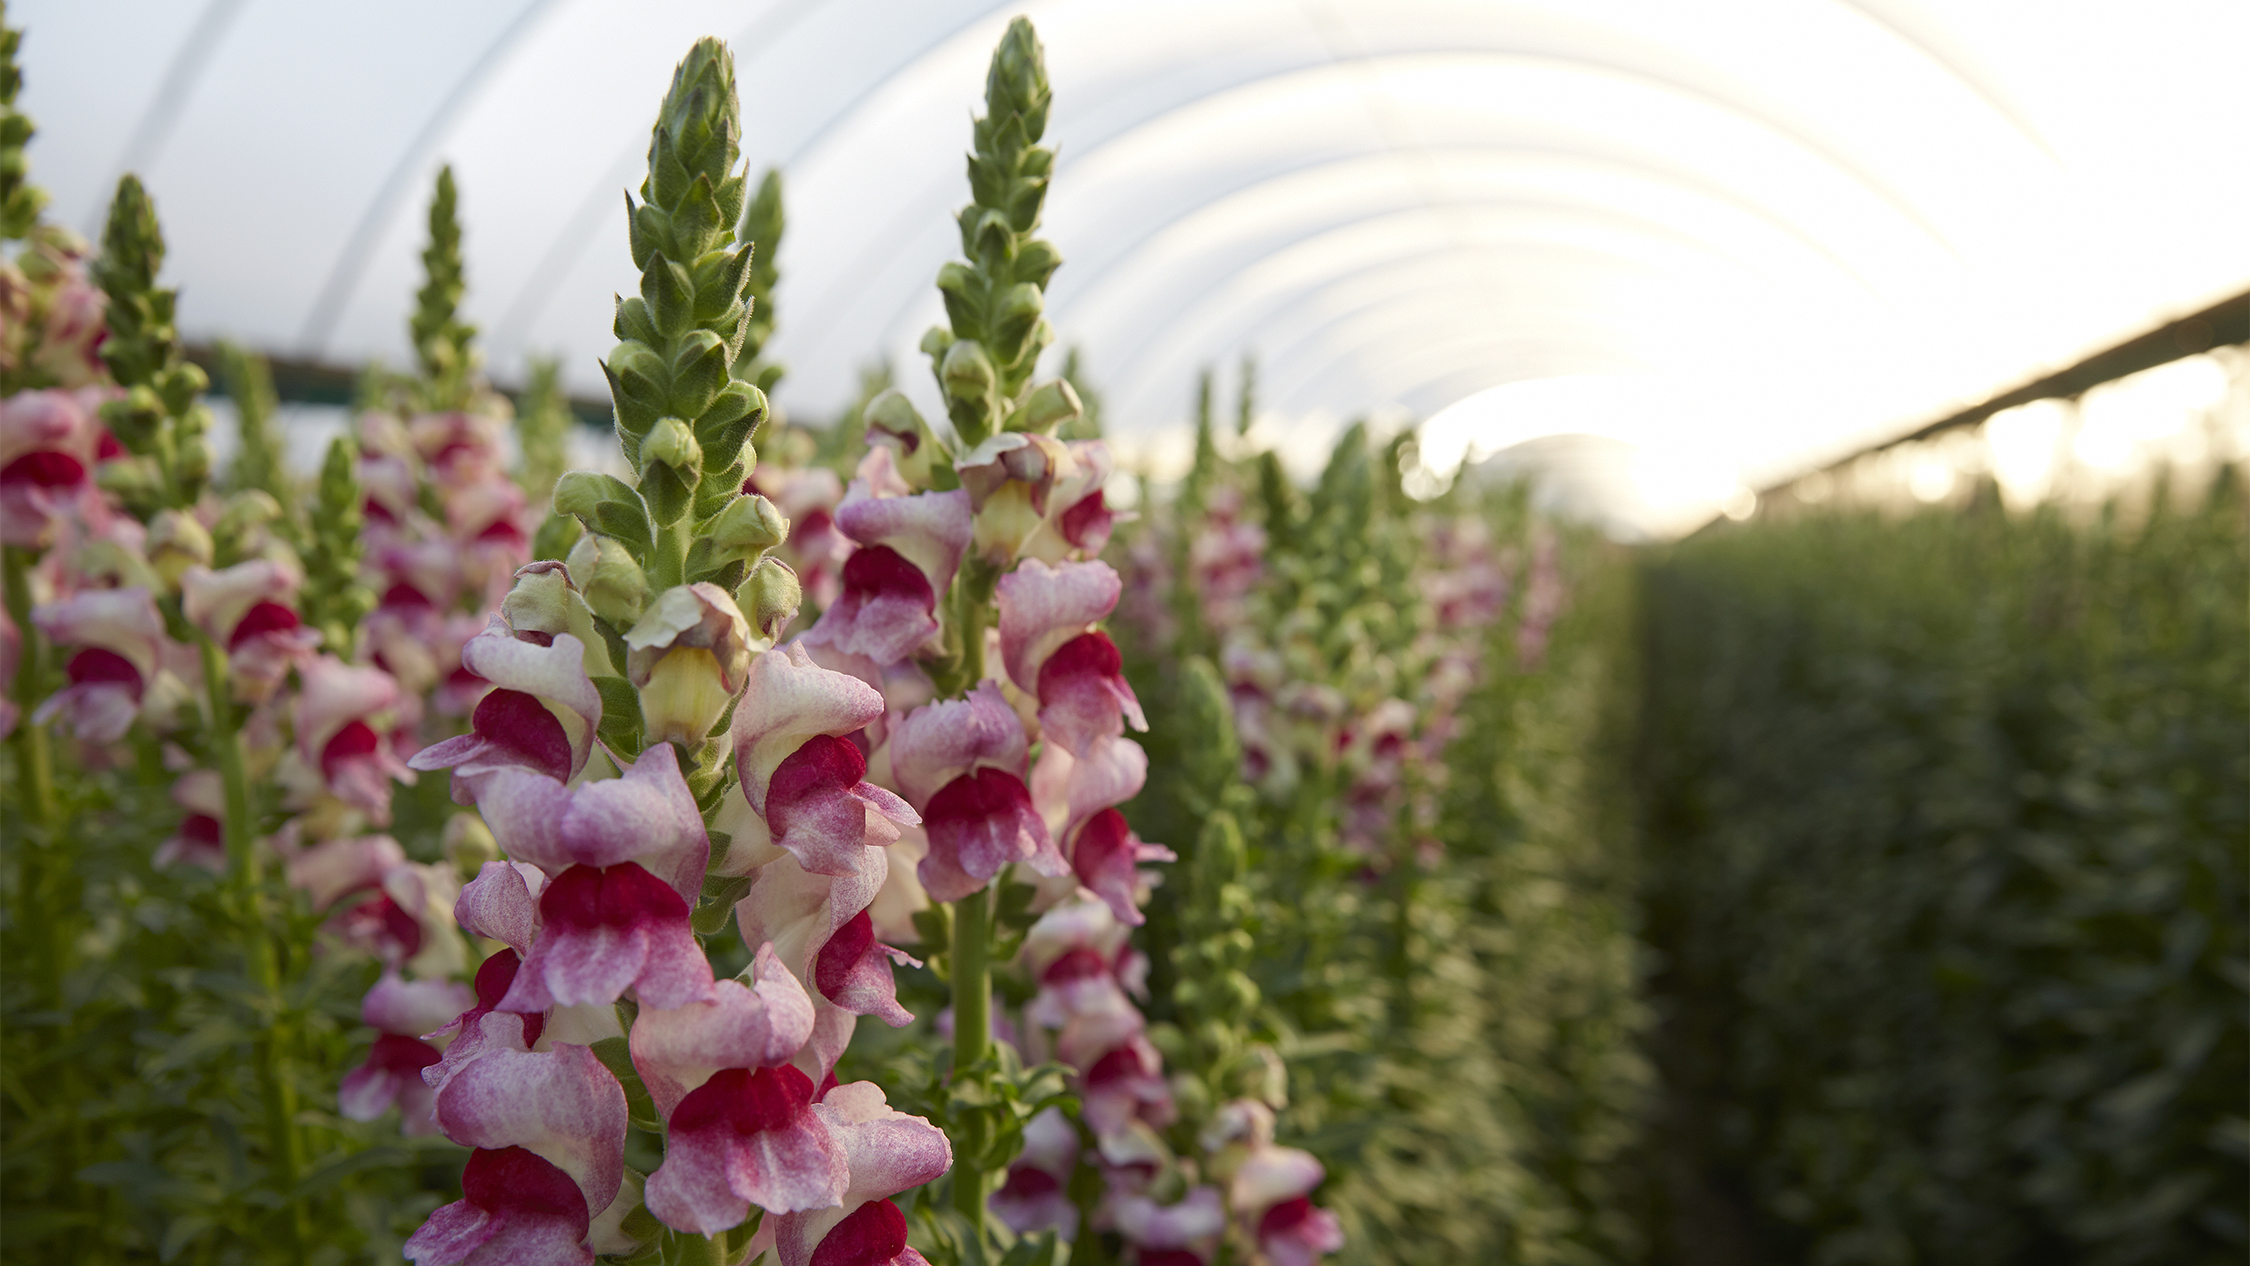 Snapdragons growing in a hoop house at fl ower farm Joseph and Sons in California, as seen on J Schwanke’s Life in Bloom on public television stations nationwide.